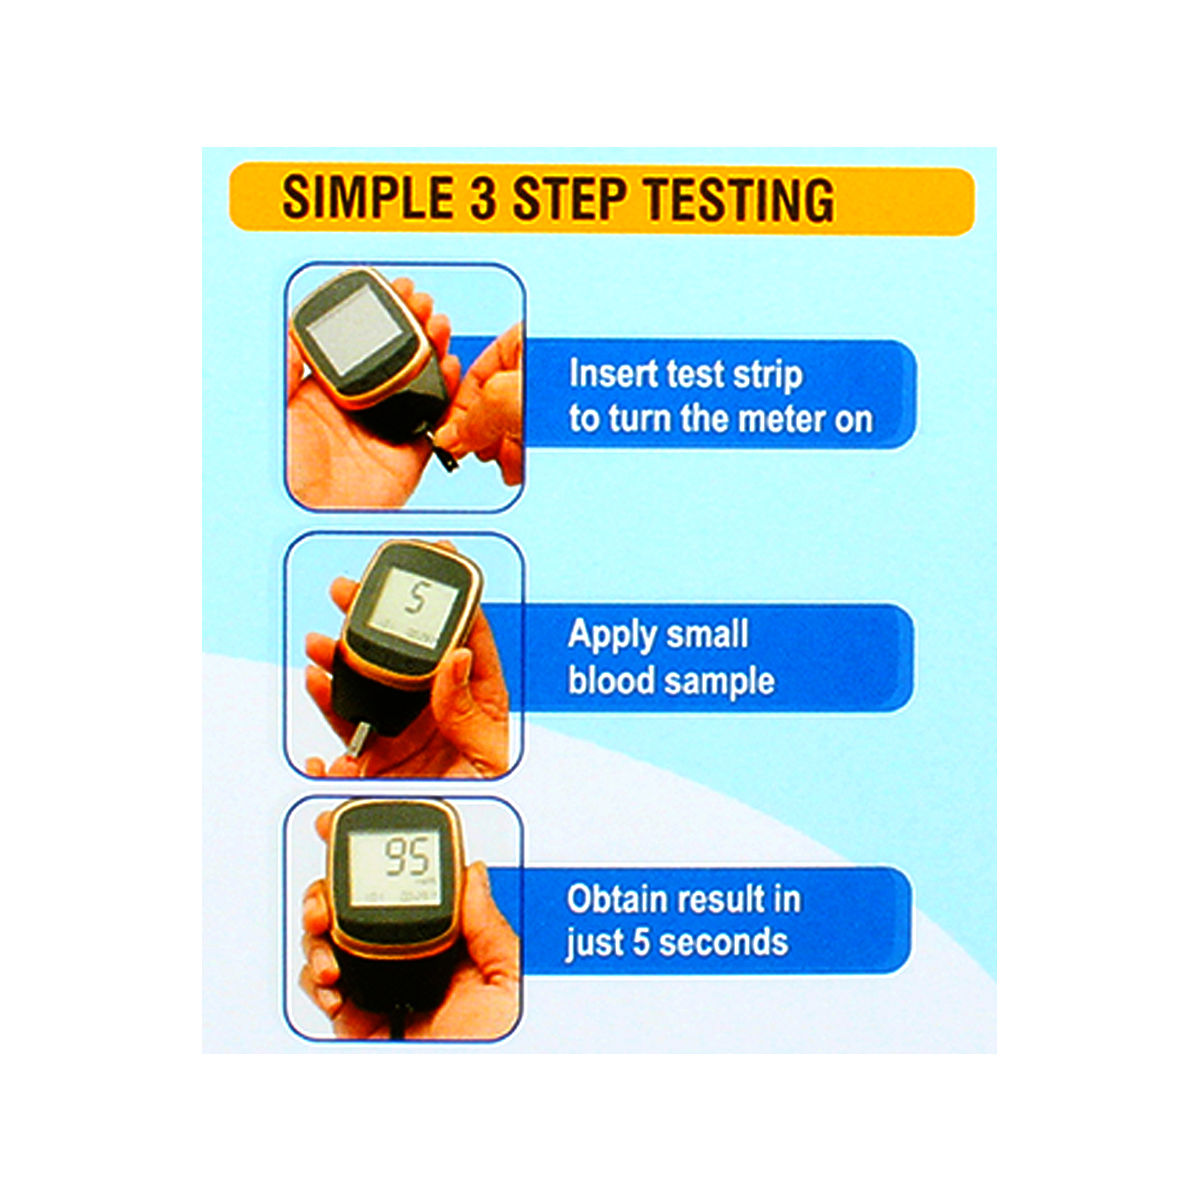 Apollo Pharmacy Blood Glucose Monitoring System APG01 with 25 Test Strips, 1 kit, Pack of 1 